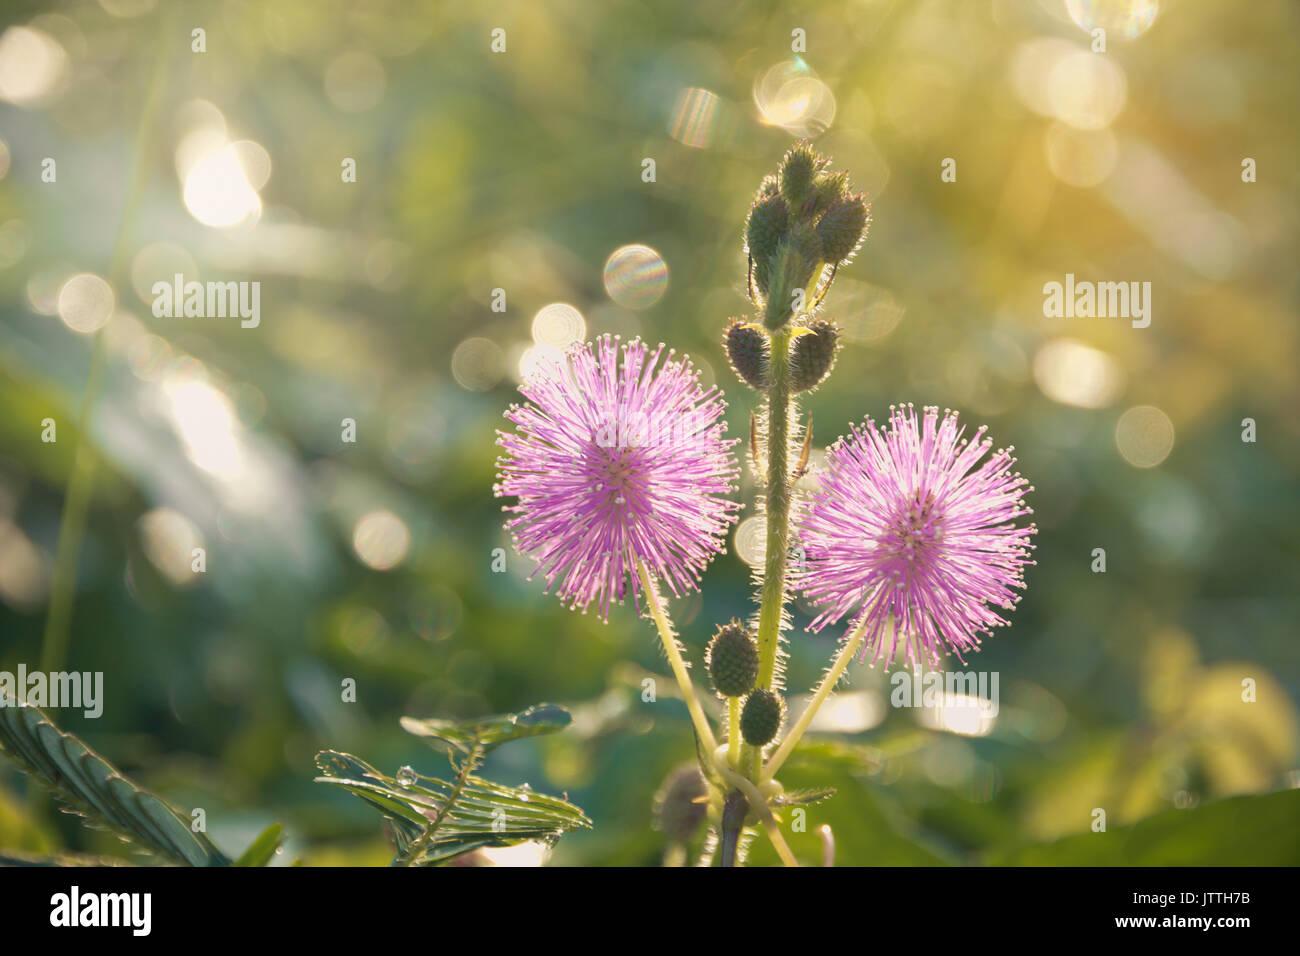 Closeup photo of a thistle wildflower in the field in thailand Stock Photo